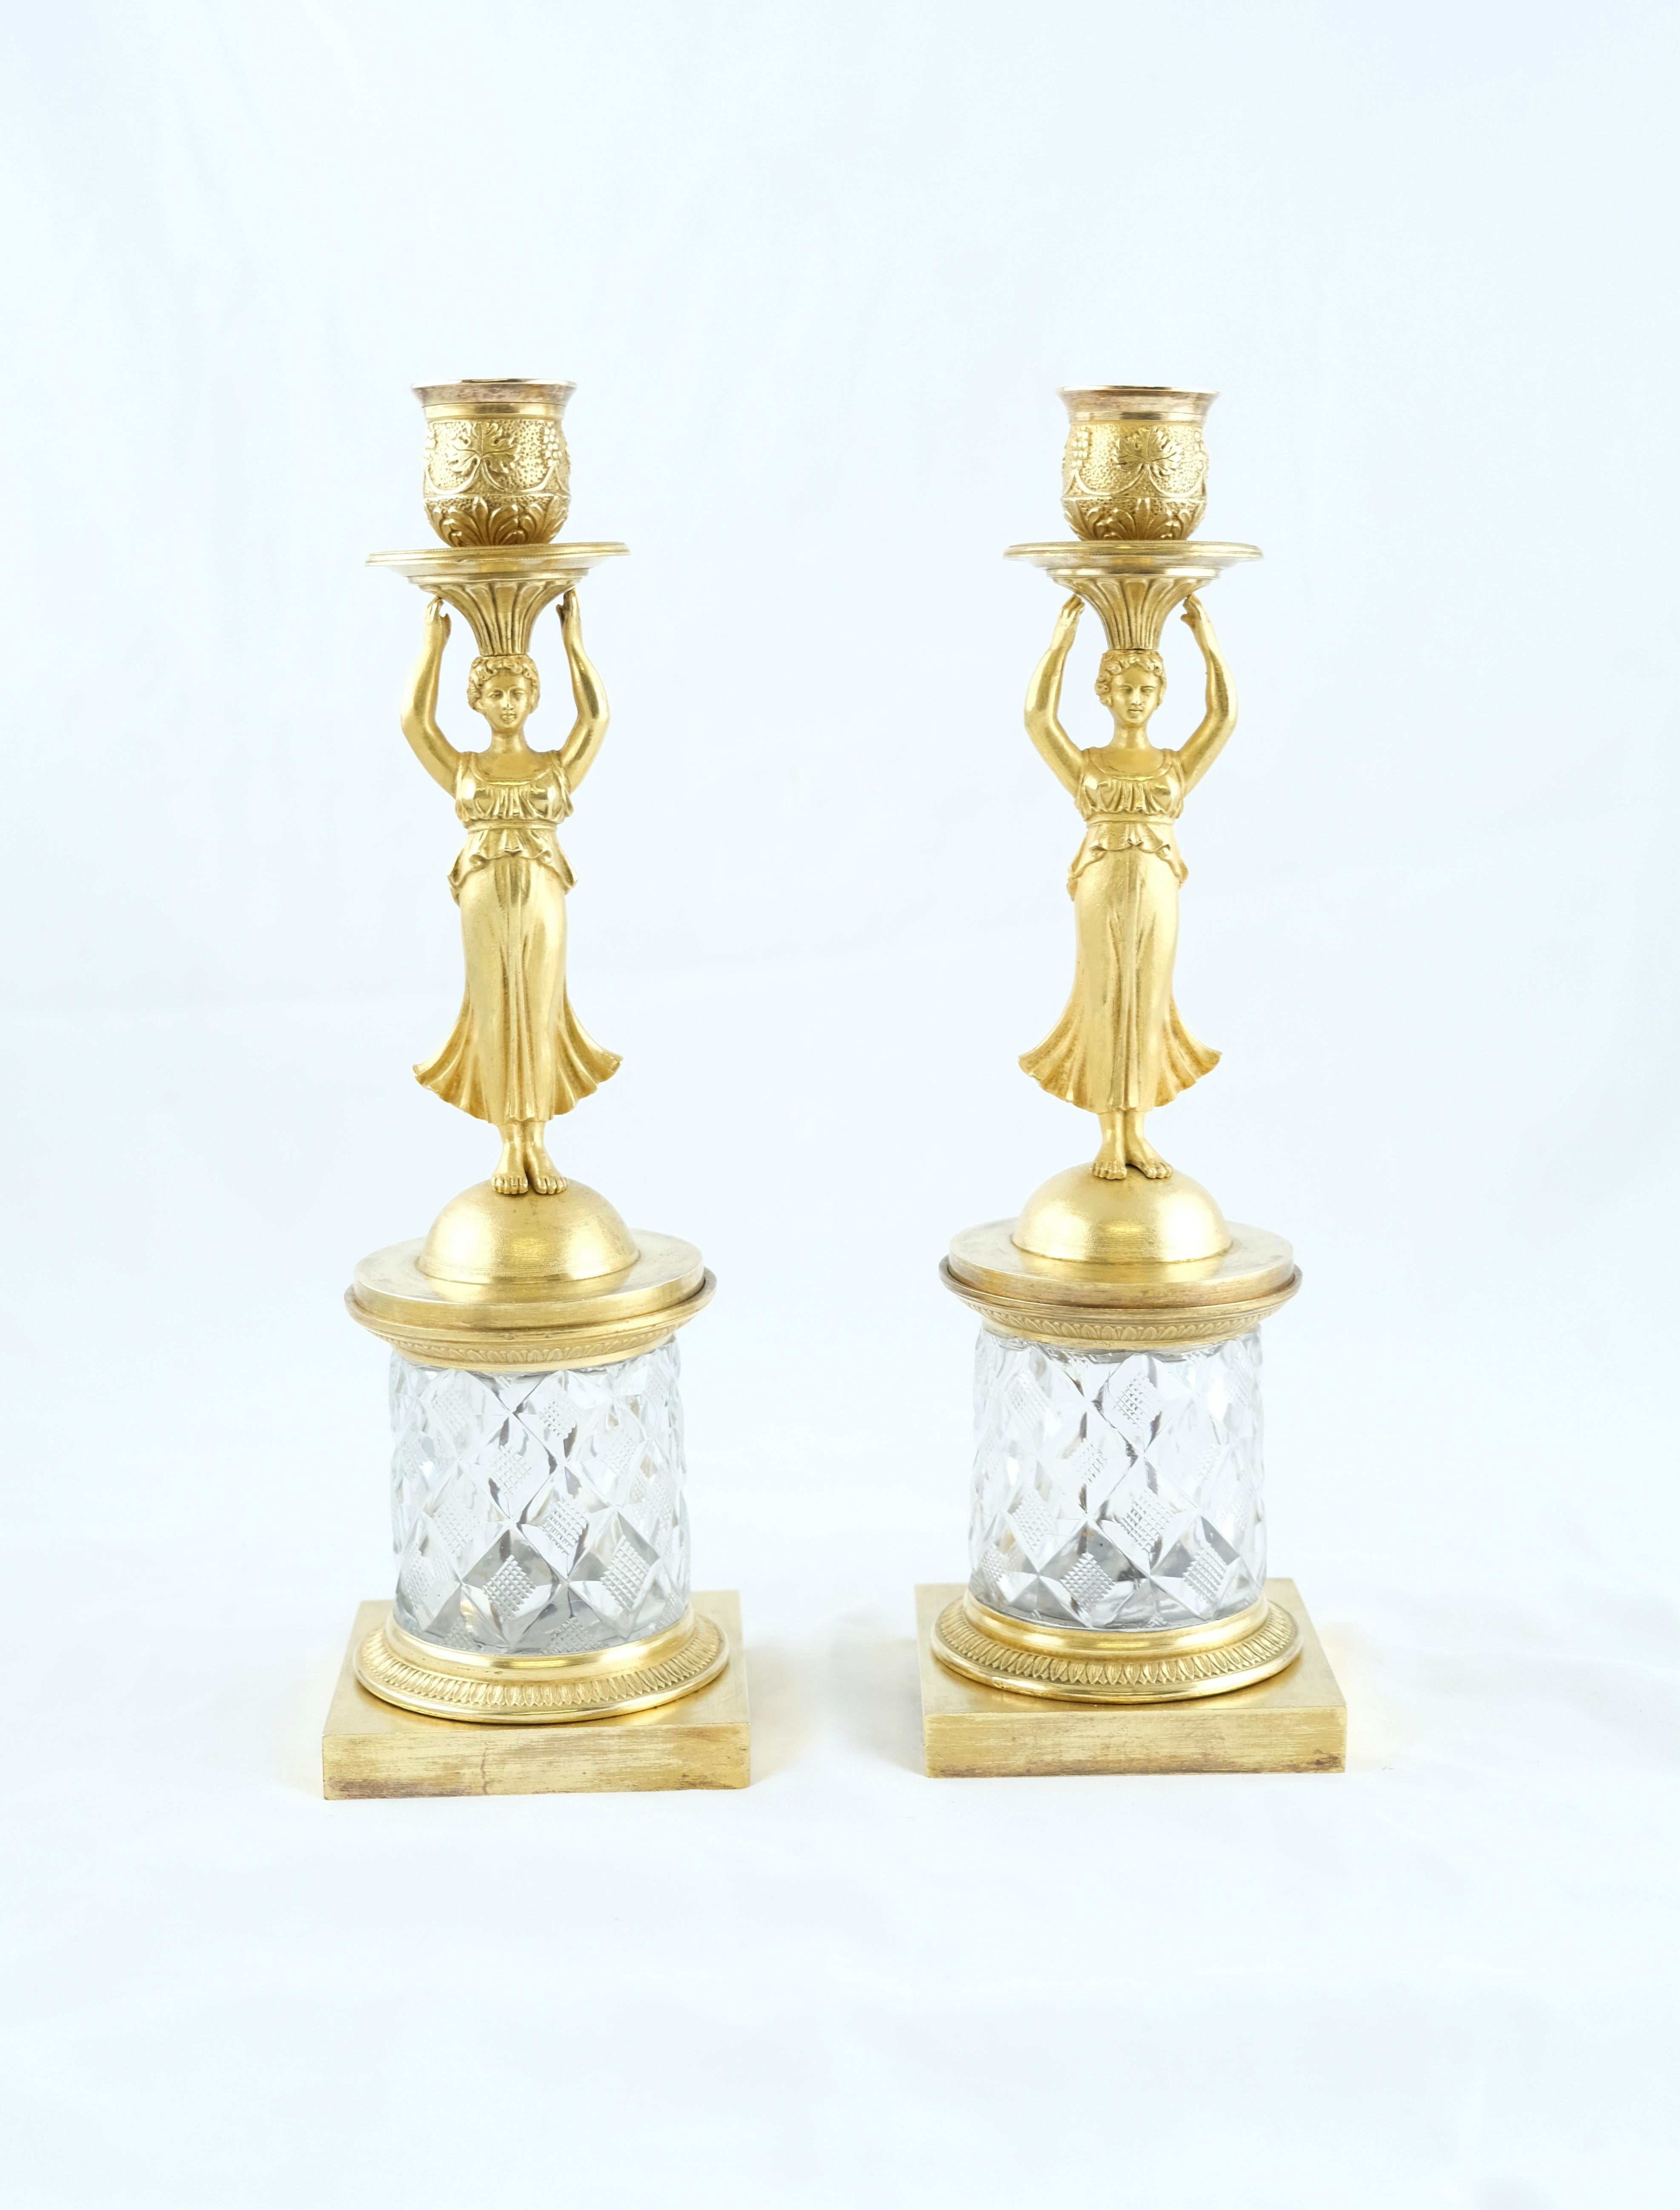 Pair of Empire Gilt Bronze and Cut Crystal Candlesticks, Ca 1810 For Sale 4